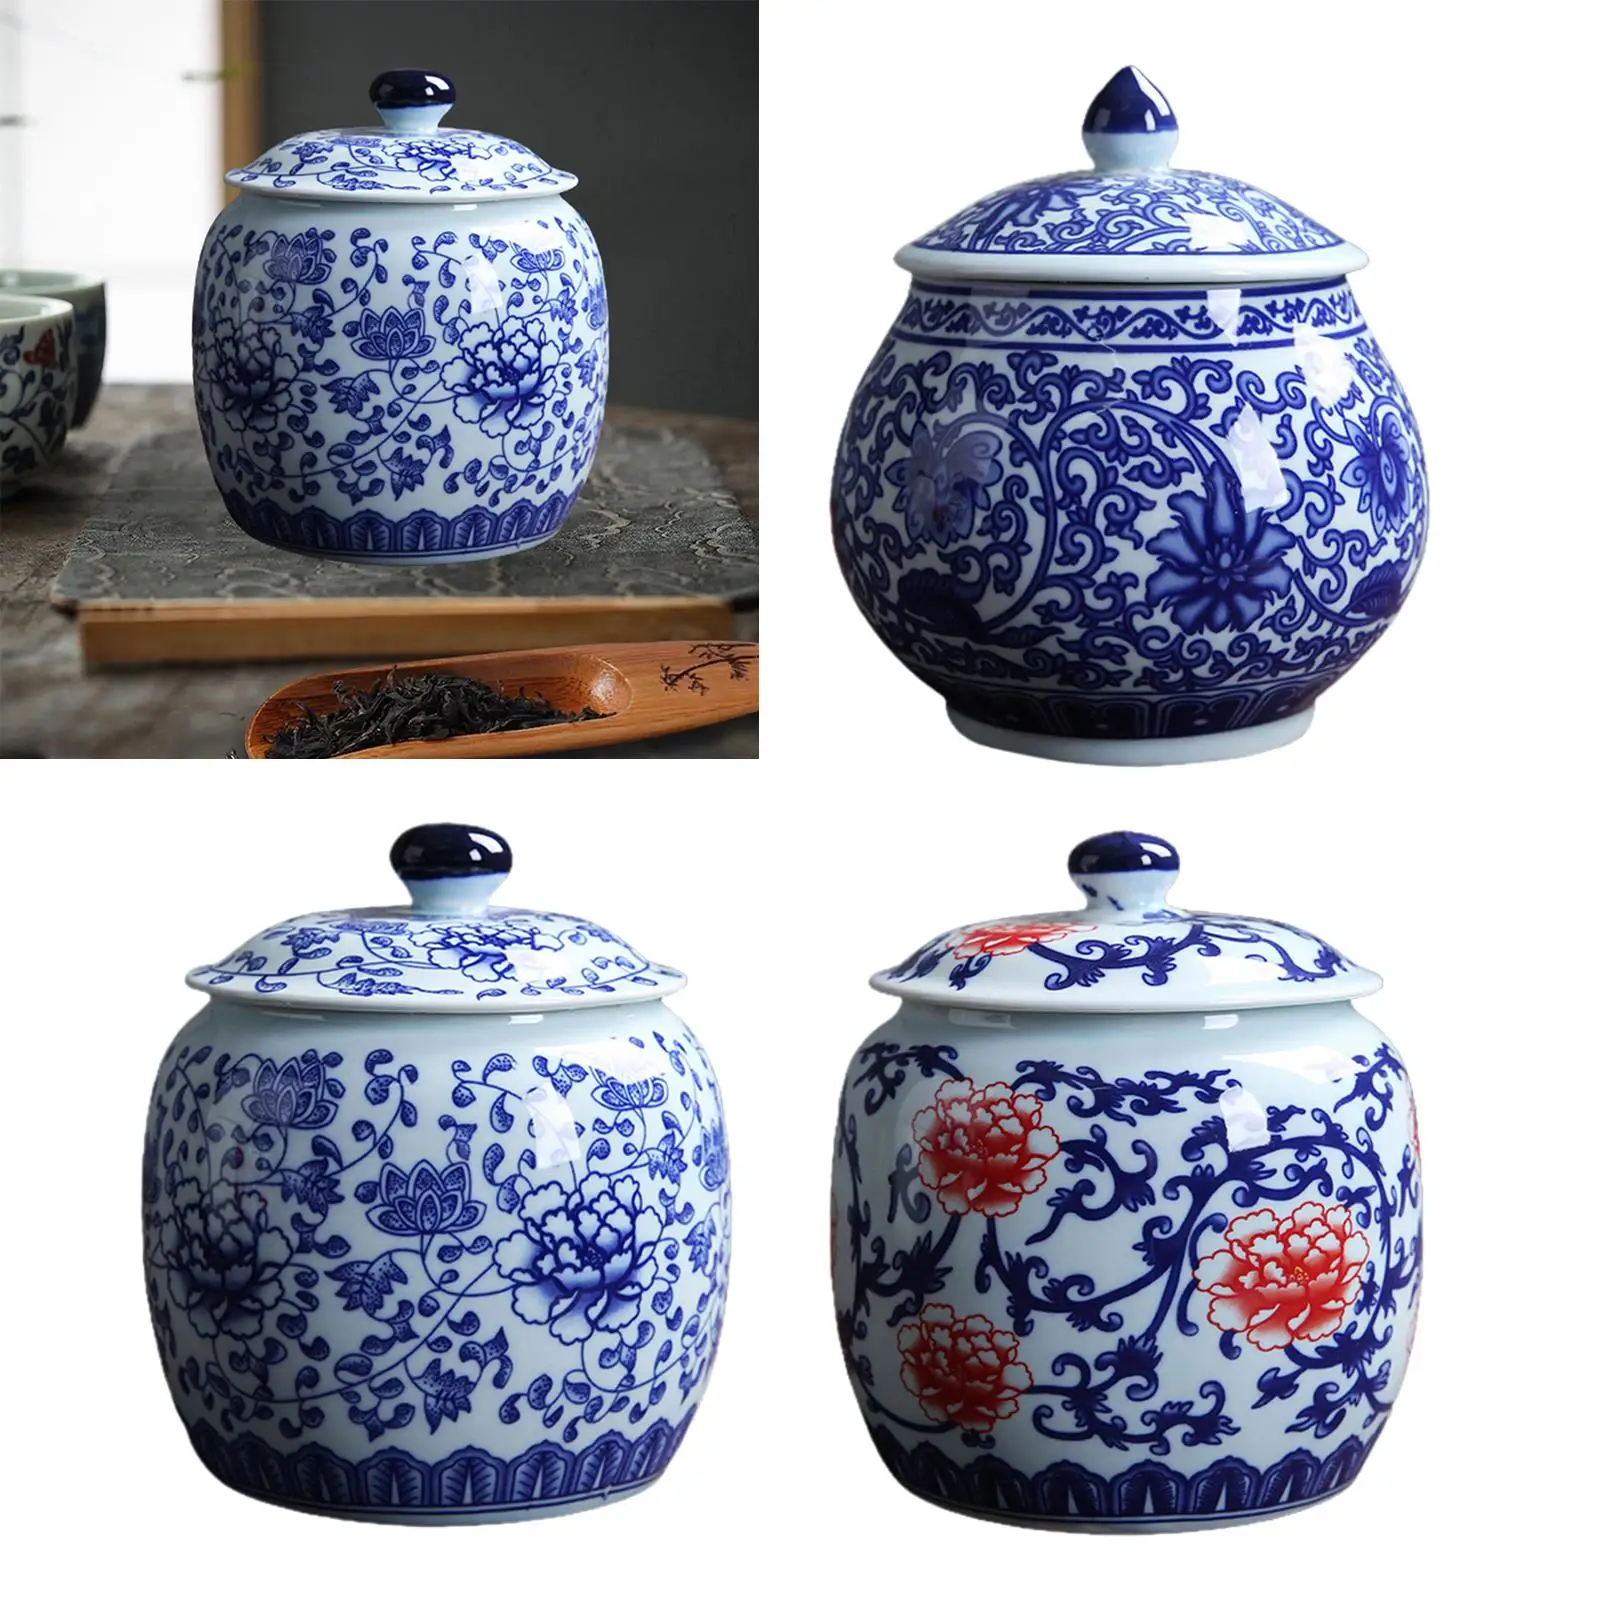 Ceramic Flower Vases Tea Canister Chinese Traditional Flowerpot Temple Jar Storages Blue White Porcelain Ginger Jars for Party